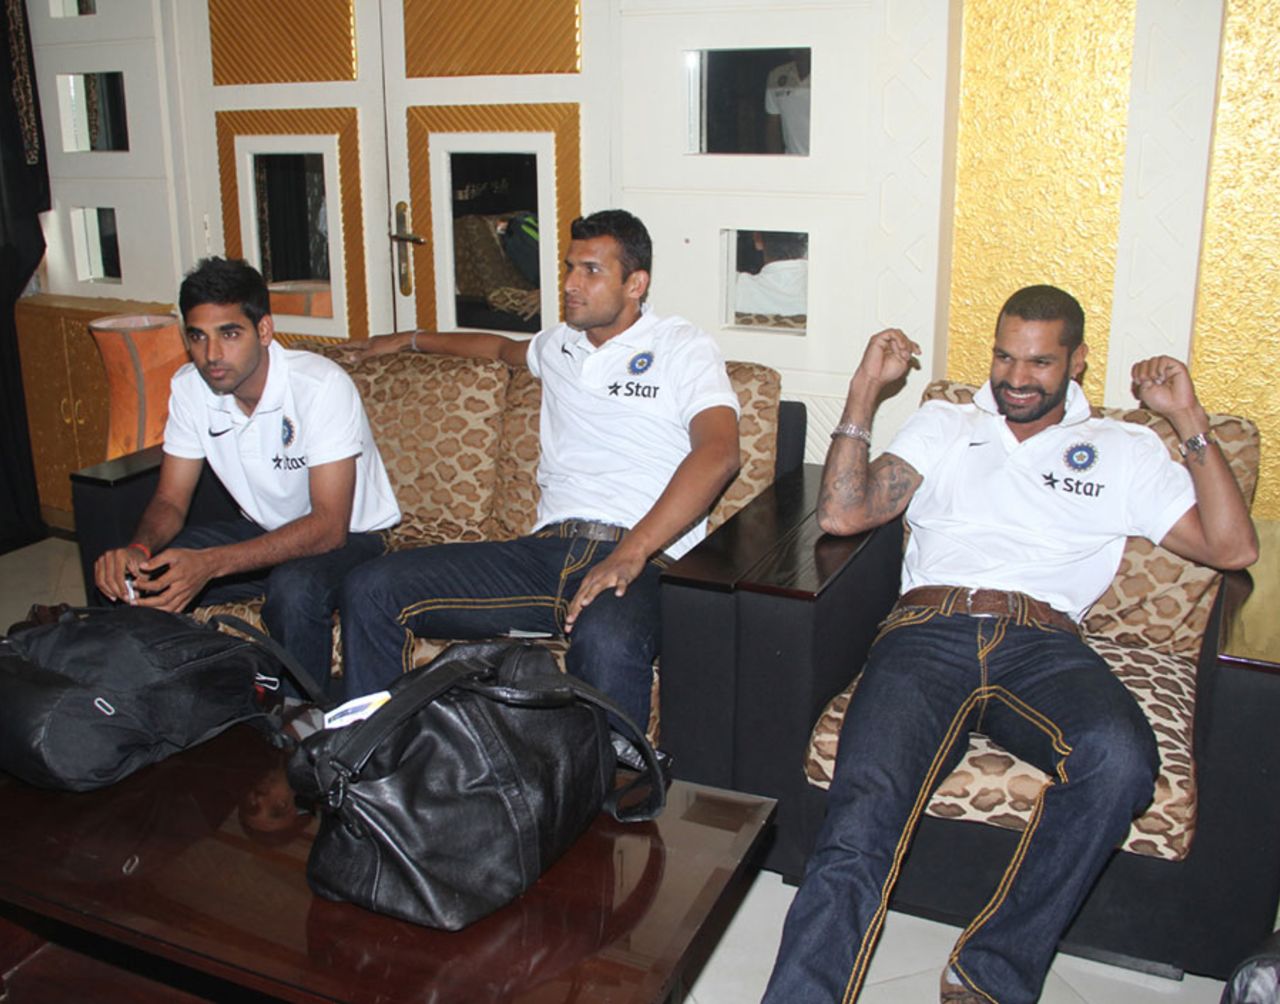 The Indian players arrive in Bangladesh for the Asia Cup, Dhaka, February 23, 2014